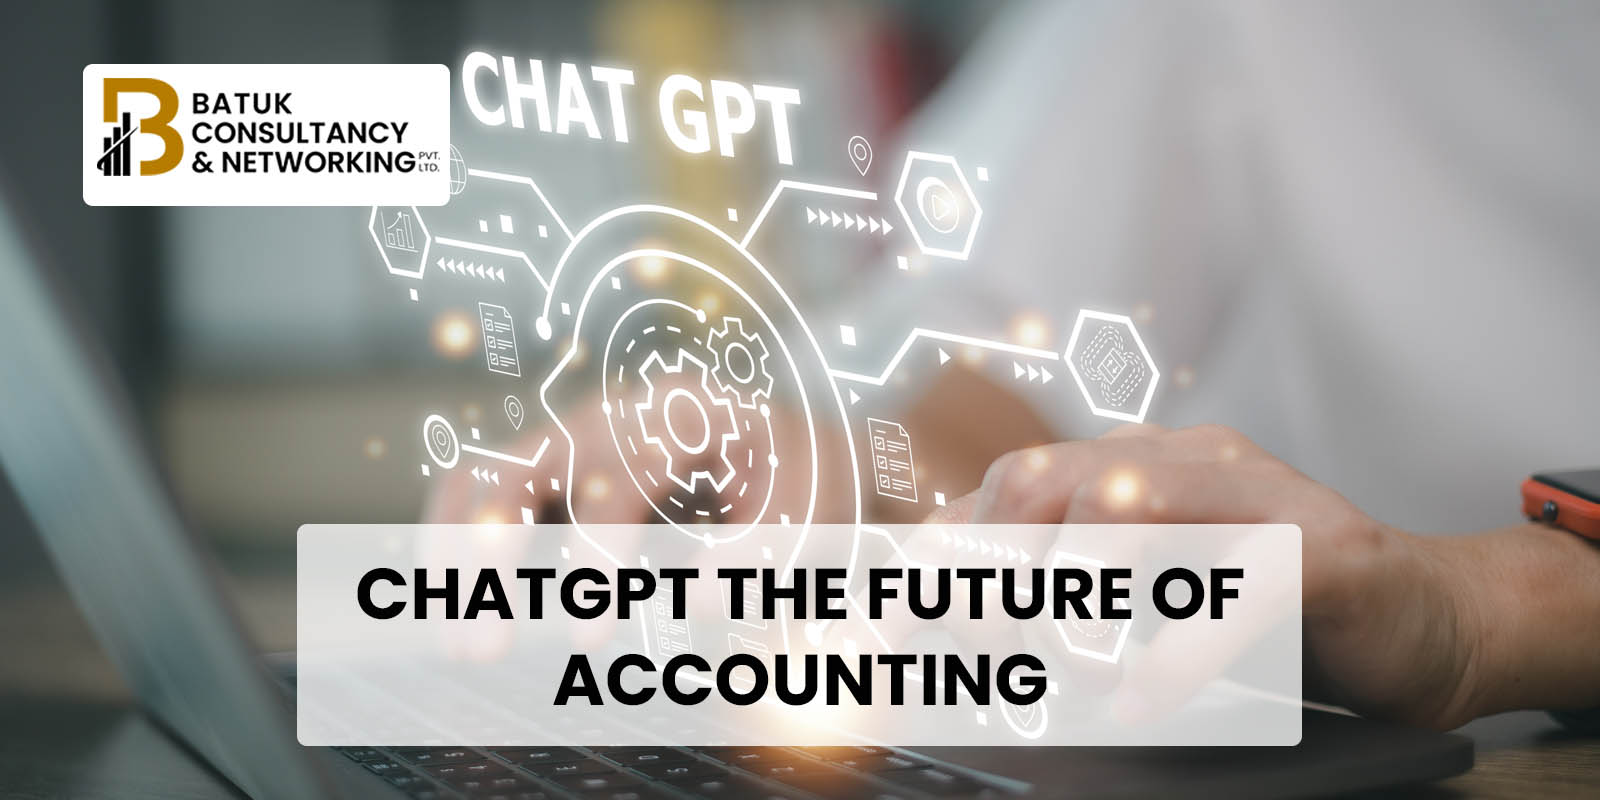 CHATGPT THE FUTURE OF ACCOUNTING